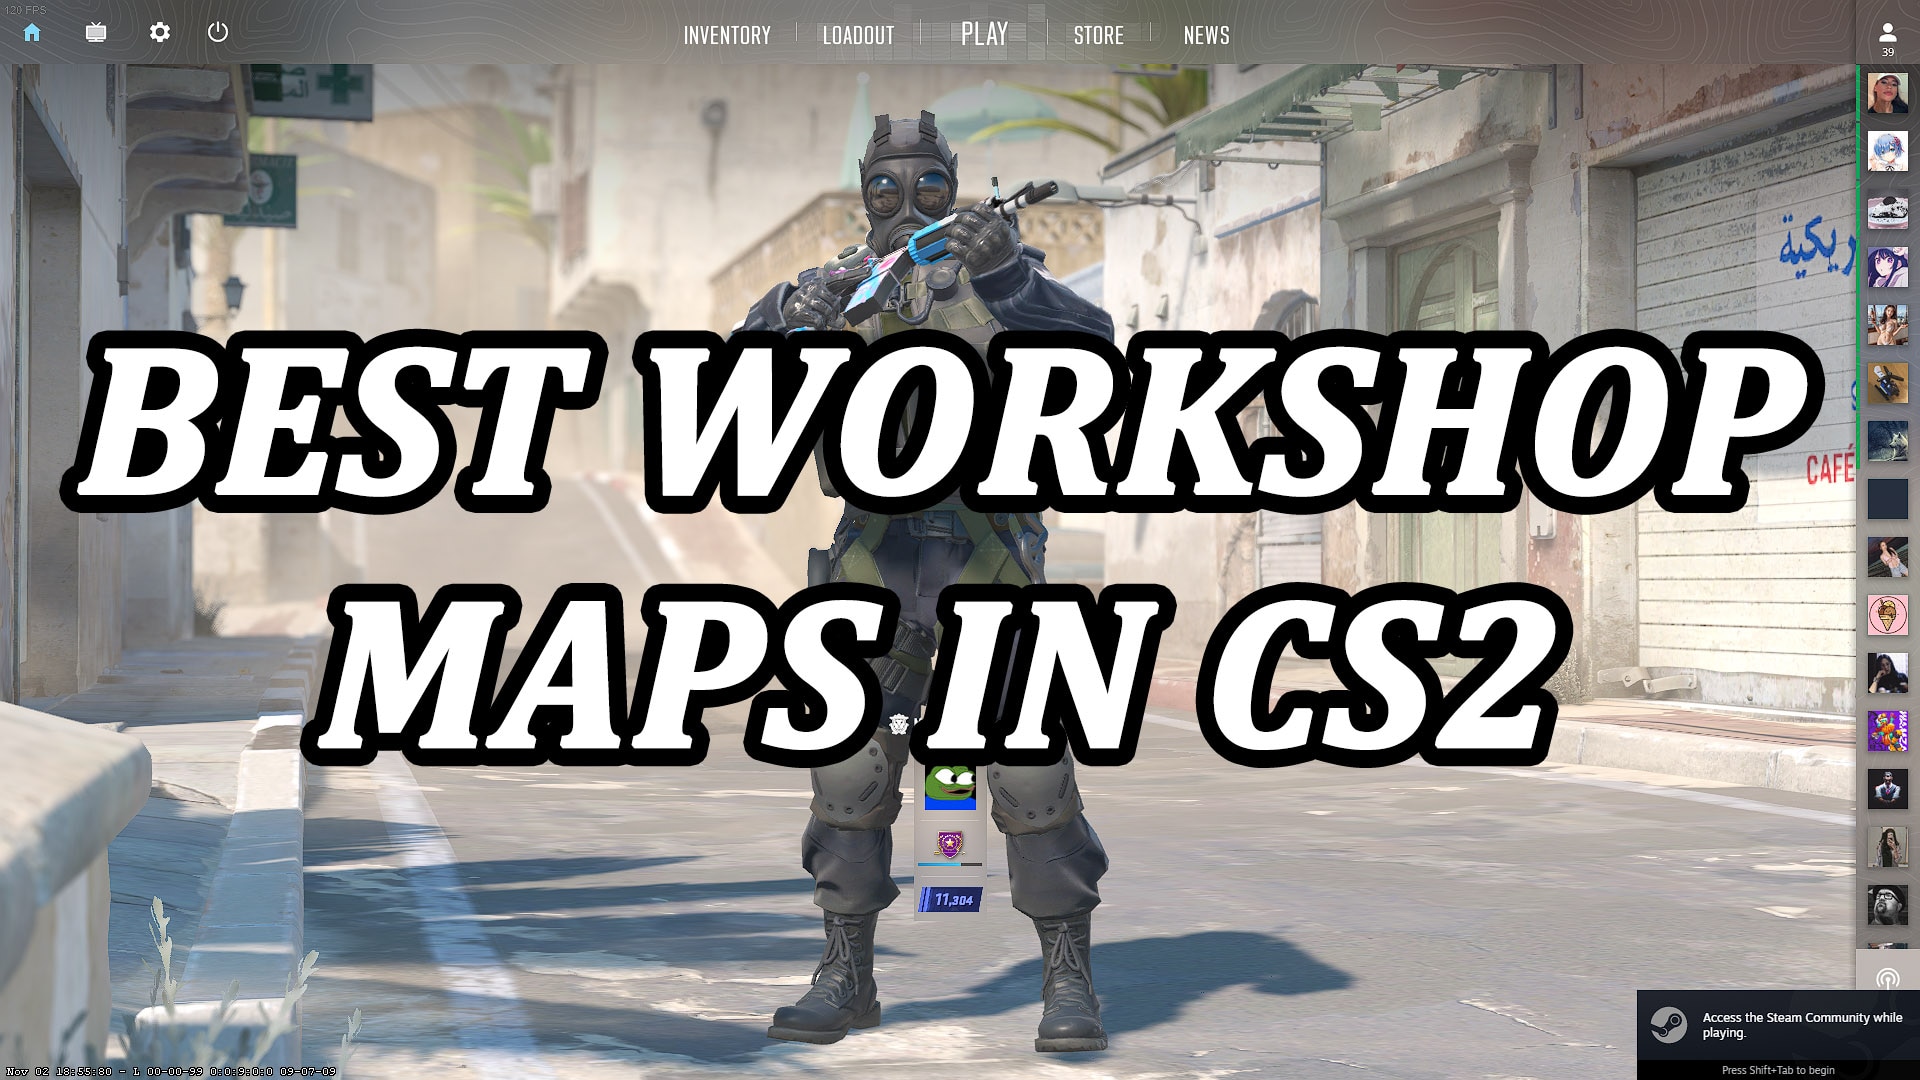 How to Play Workshop Maps in CS2